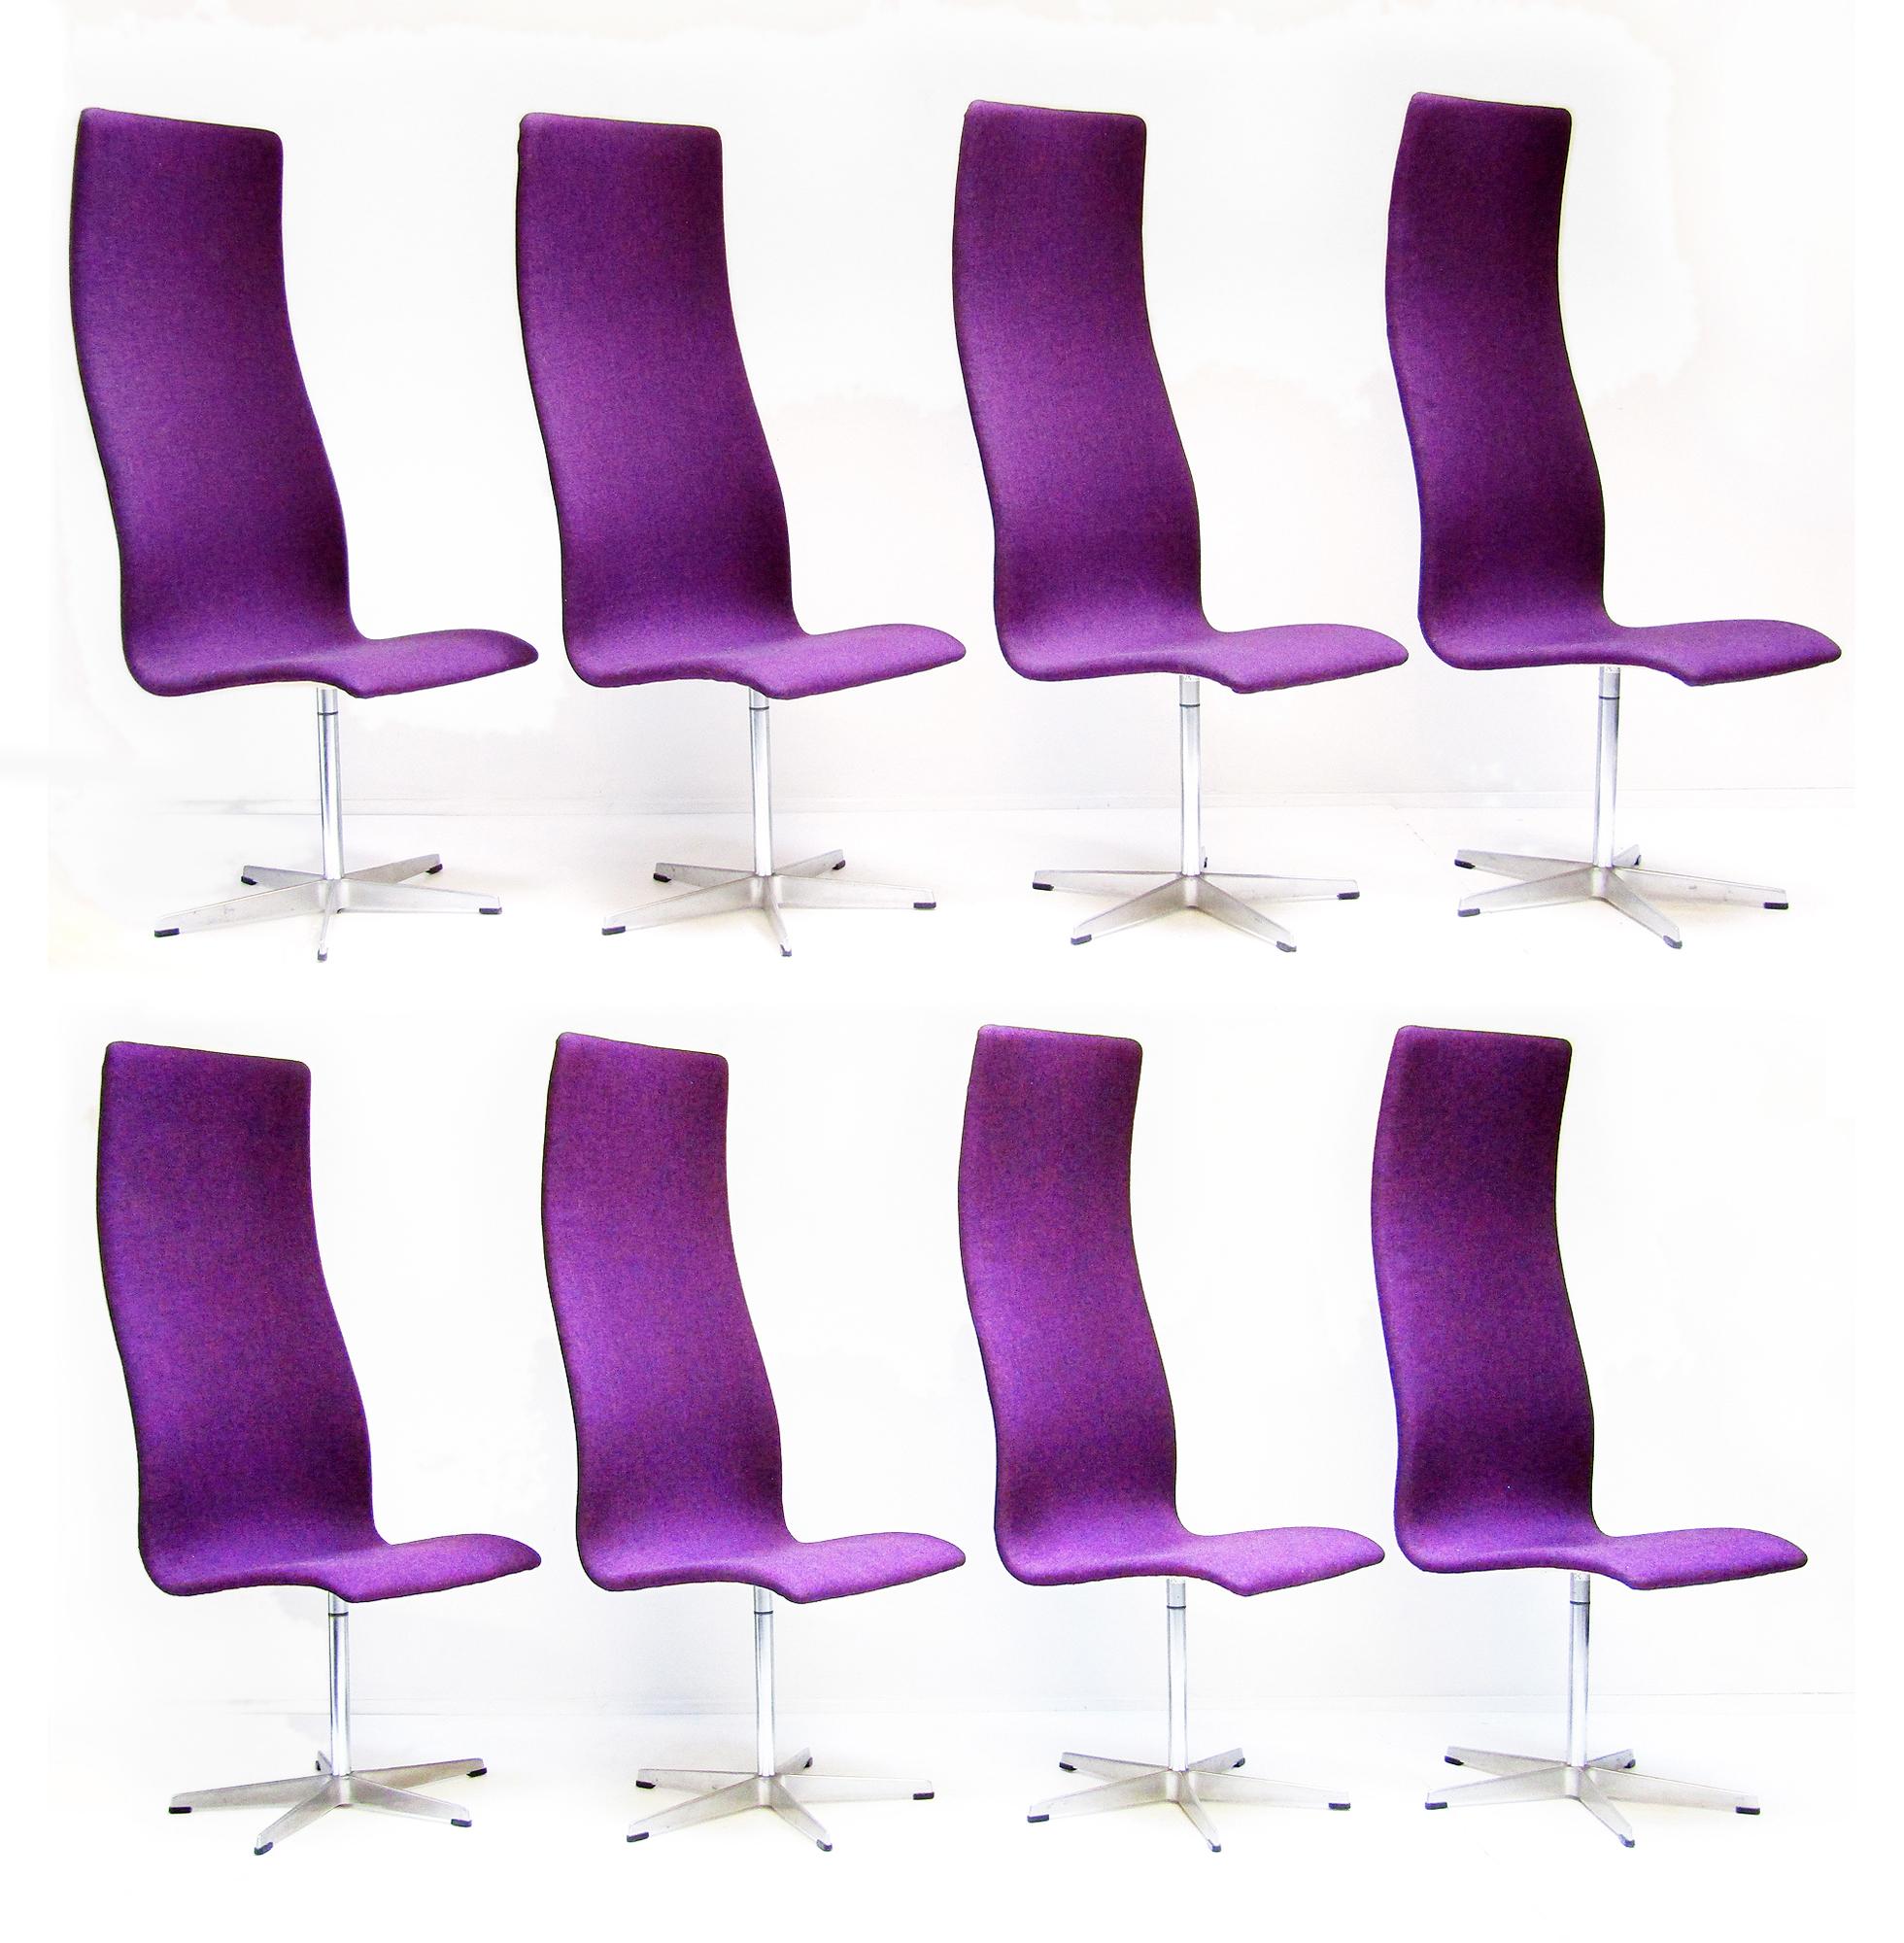 A set of eight vintage 1960s high back Oxford chairs by Arne Jacobsen for Fritz Hansen.

This classic modernist design was created in the early 1960s for St Catherine's College, Oxford University, for use in the banqueting hall. These stately